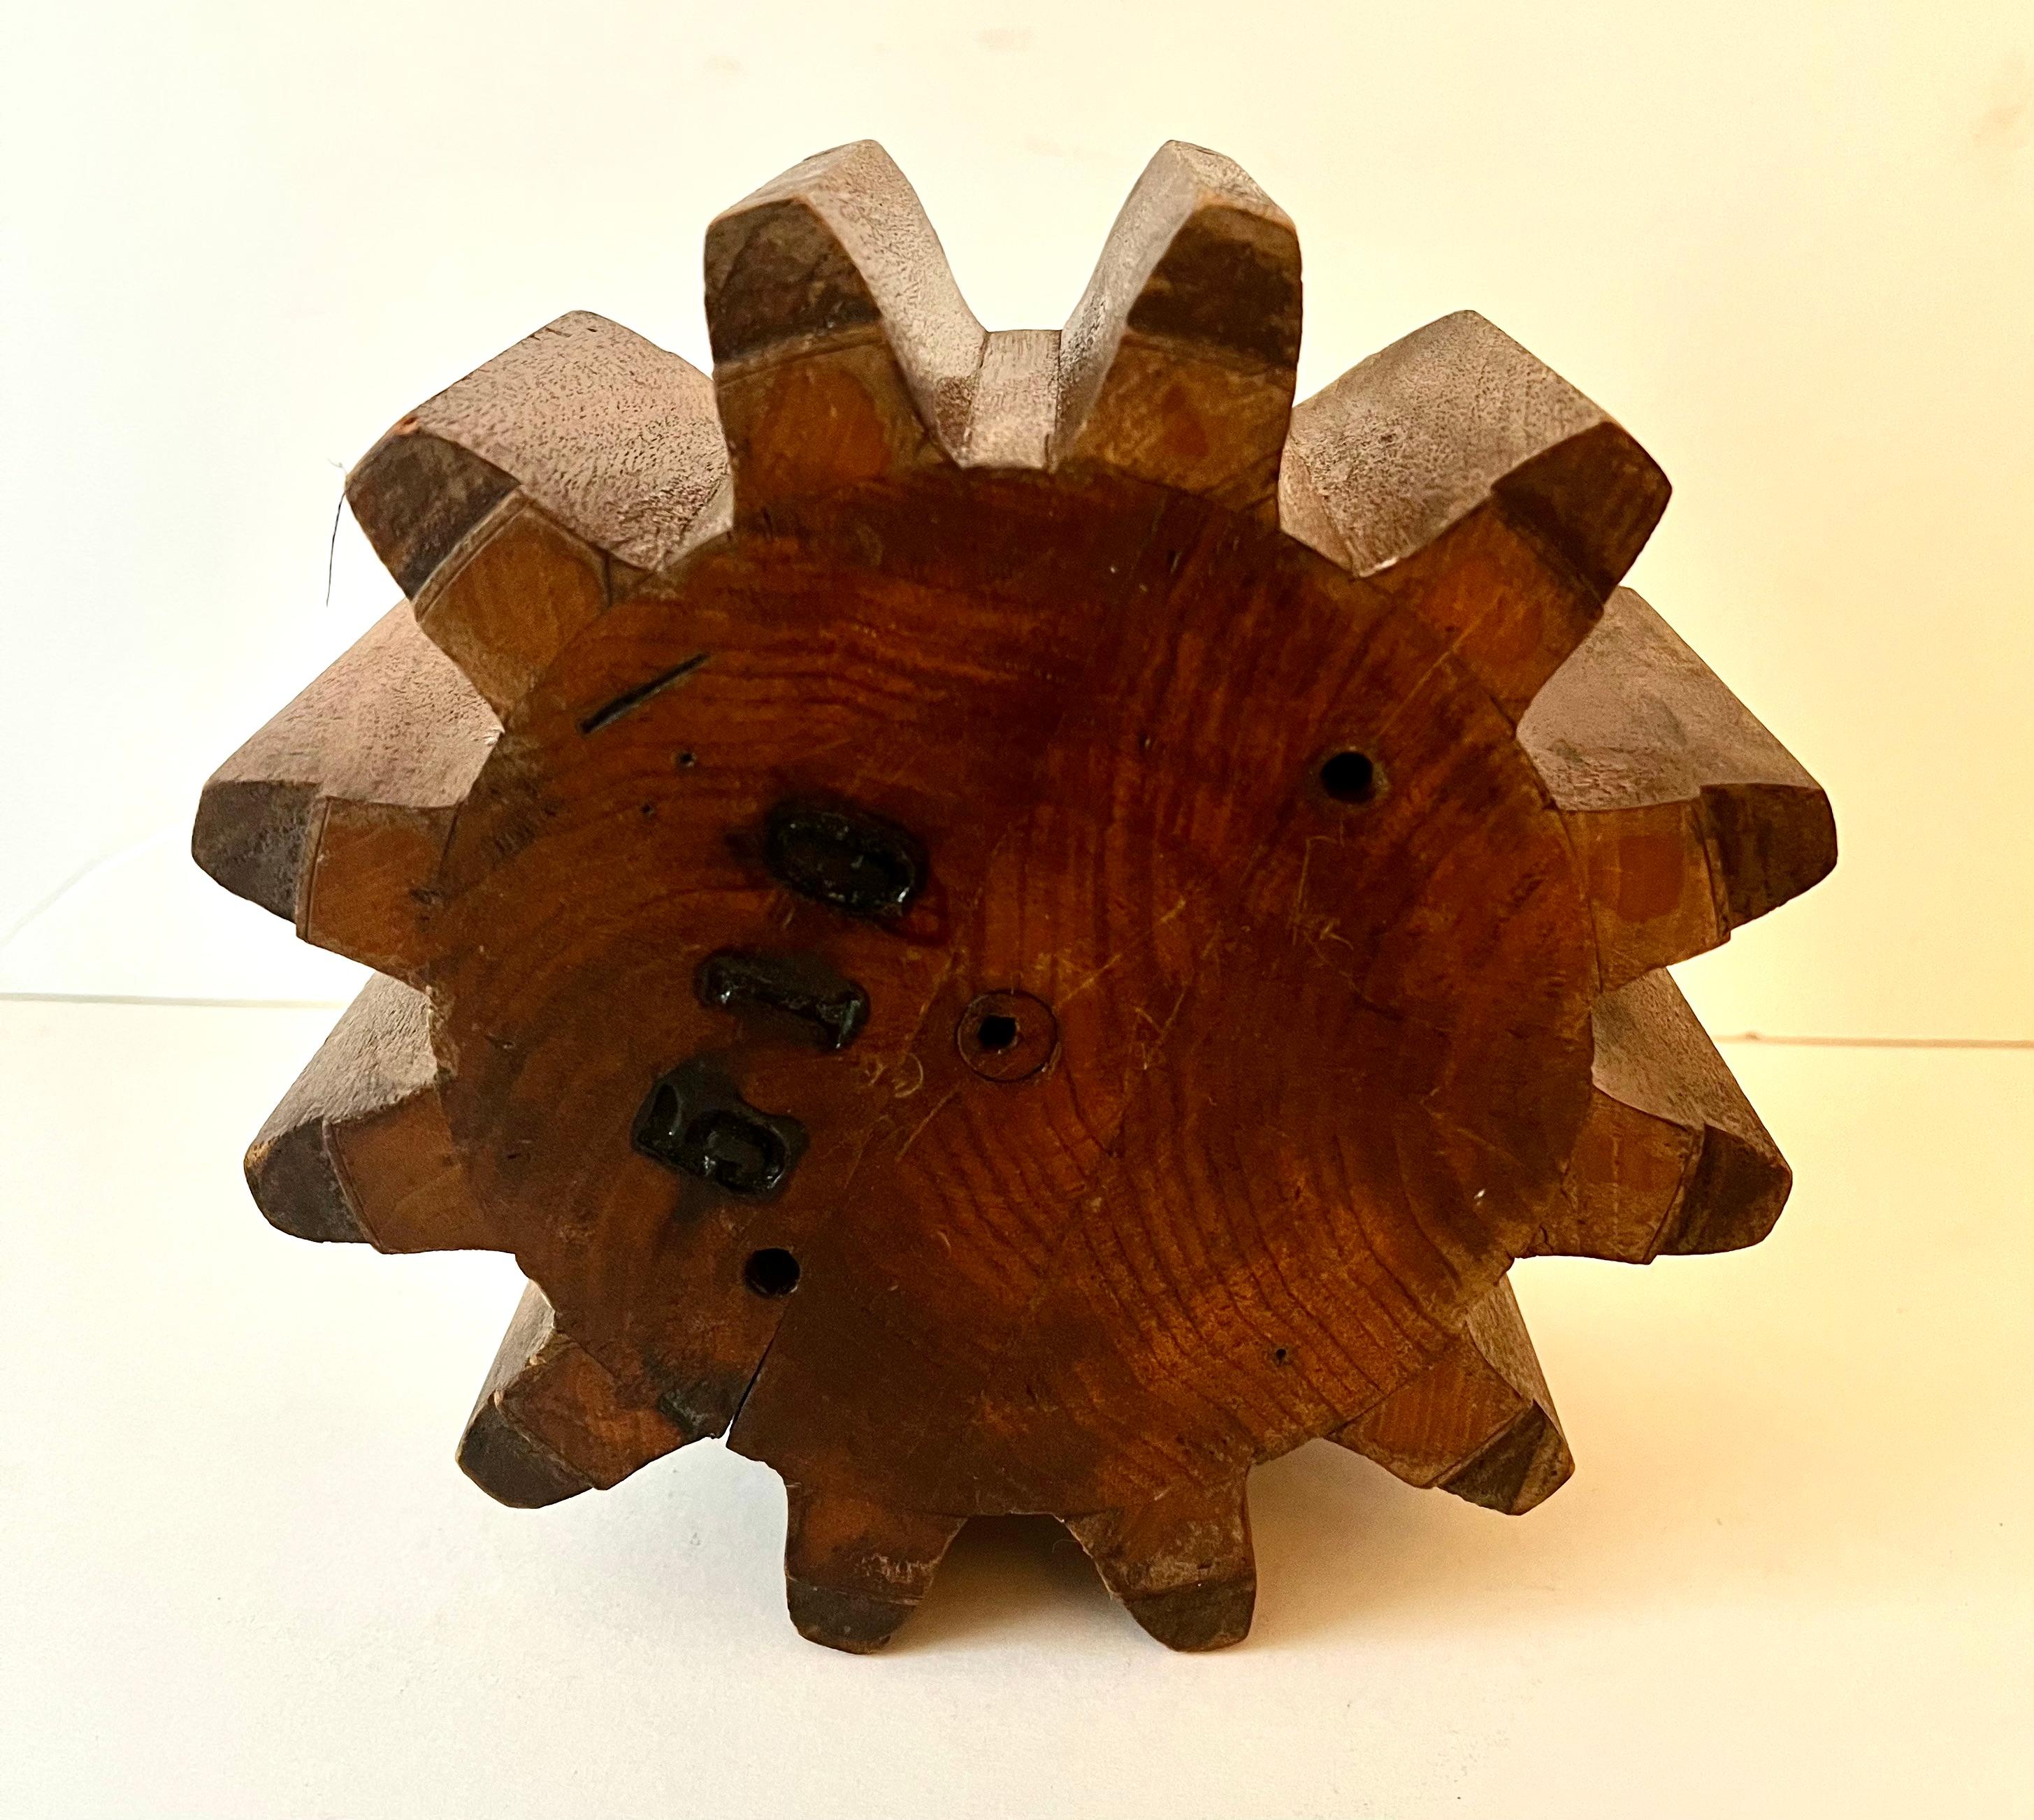 A wooden piece of a gear or a wooden Cog.  An old architectural Element.  These pieces are wonderful filler on a side table or console table that is telling an interesting story.  This could also be hung on a wall, or used as a paperweight.  

A